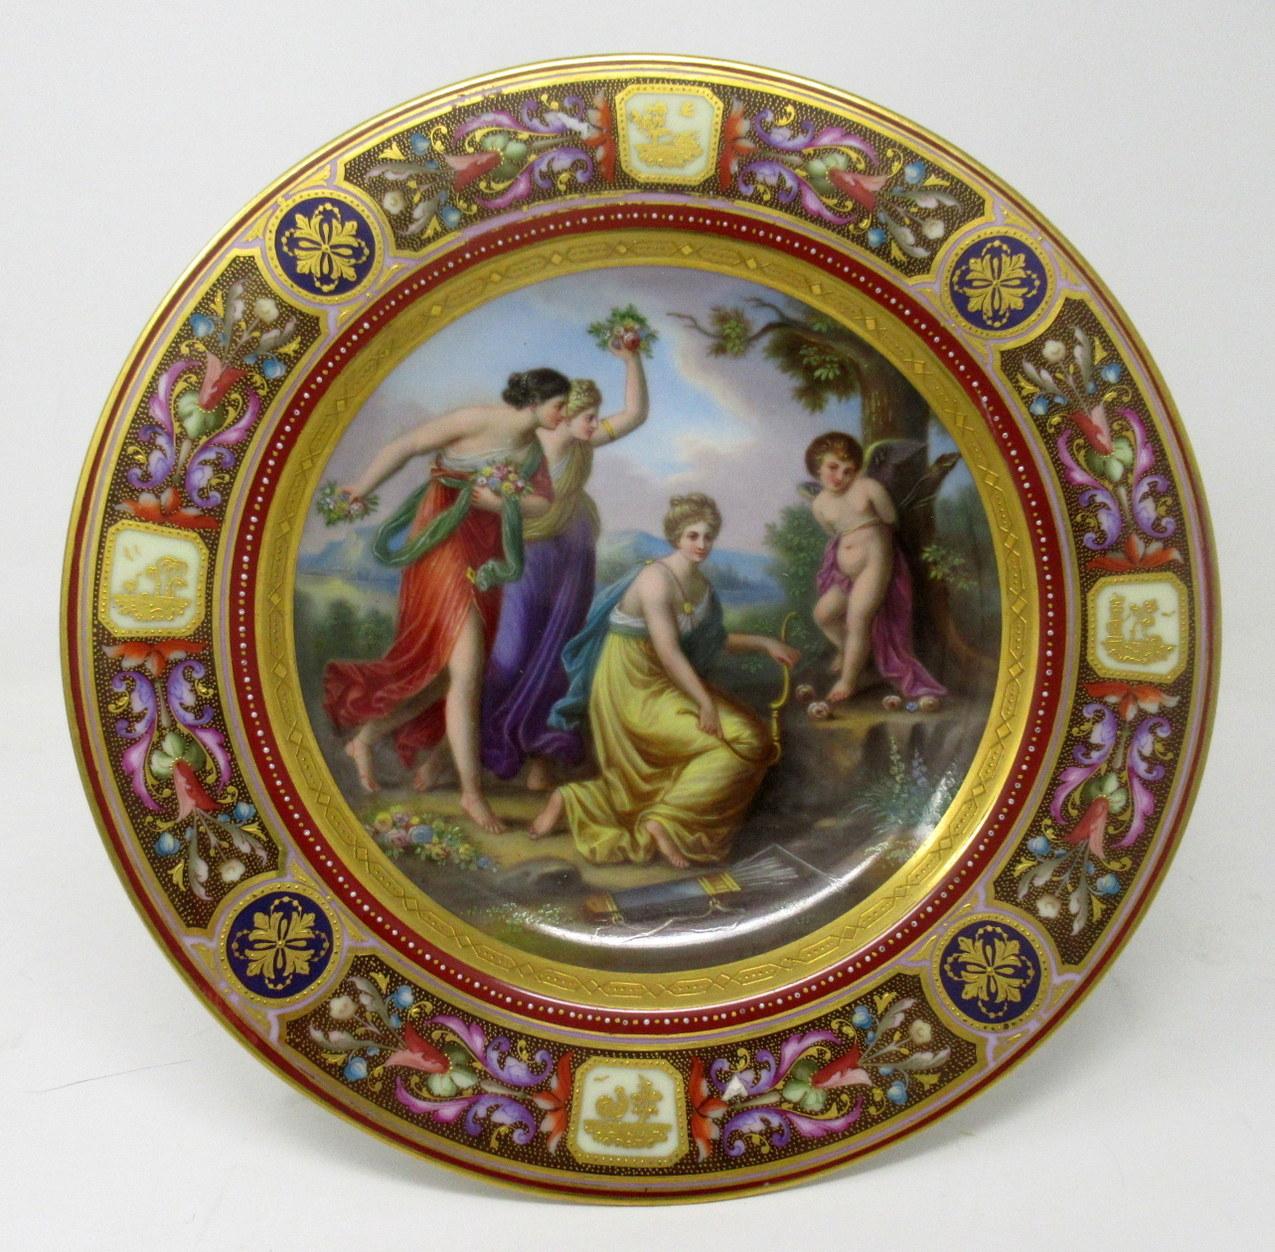 An exceptionally fine quality early edwardian signed Austrian Royal Vienna cabinet deep dish plate of circular outline. Last quarter of the nineteenth century. Signed lower center KNOILLEZ, a well-respected Artist who worked for KPM (Royal Porcelain